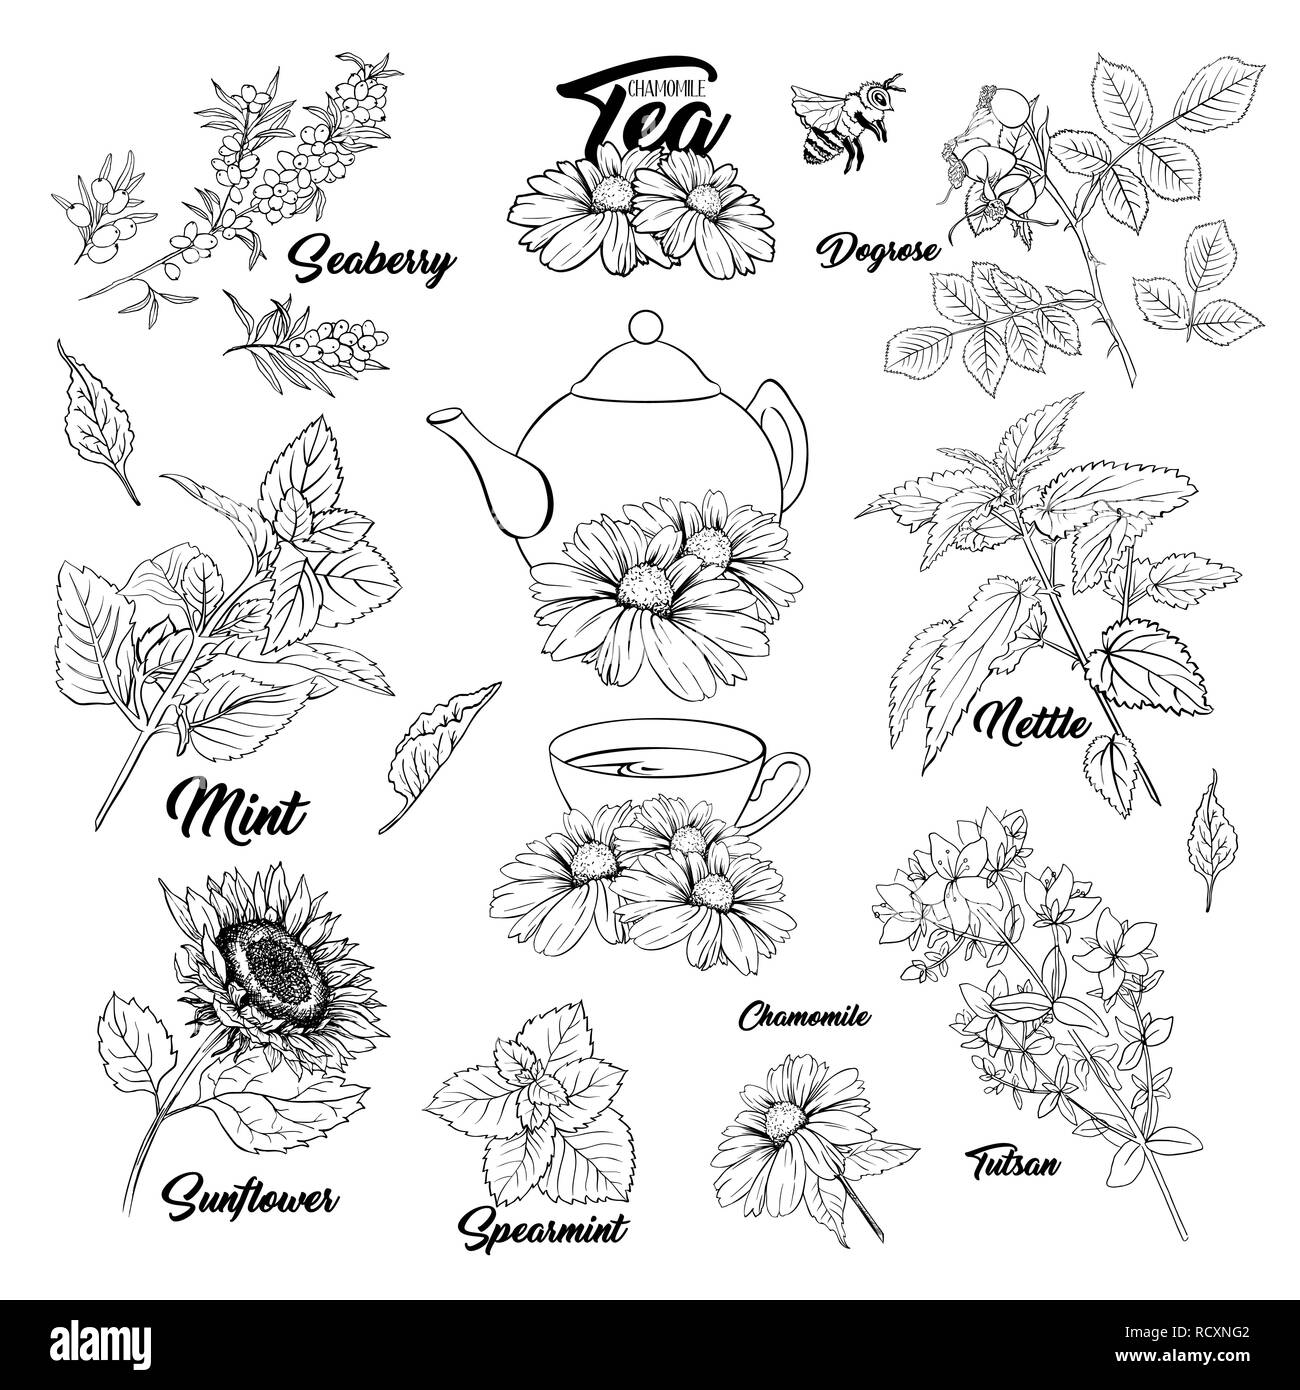 Tea Herbs Botany Plants Outline Set. Sketch Isolated Hand Drawn Engraved Illustration of Stinning Daisy or Chamomile Flower. Dogrose, Mint, Tutsan Herb. Herbal Medicine Nettle. Seaberry and Sunflower Stock Vector